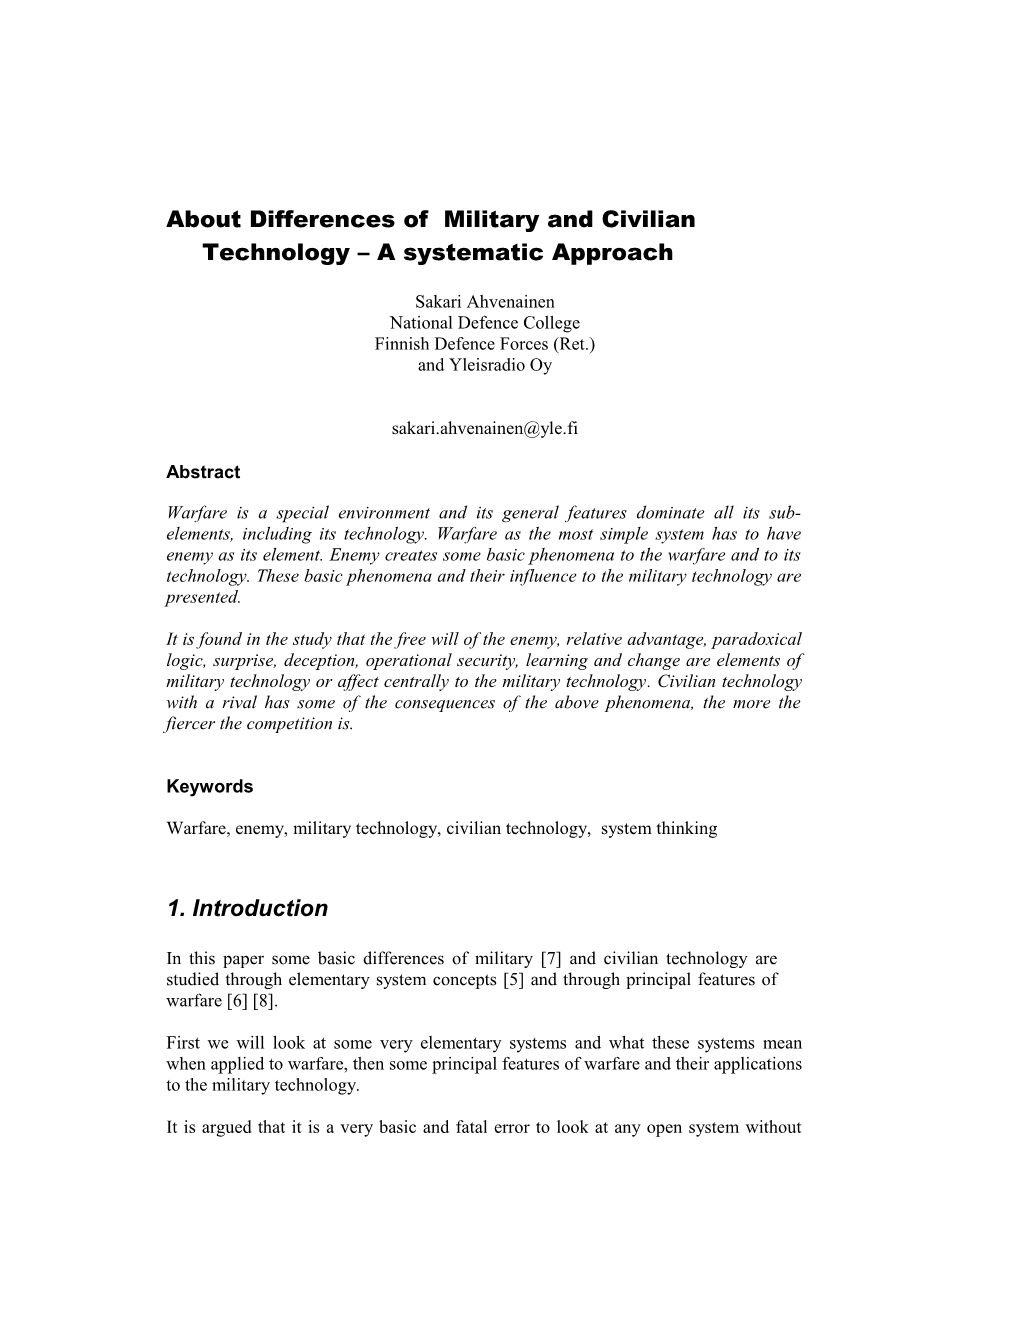 About Differences of Military and Civilian Technology a Systematic Approach